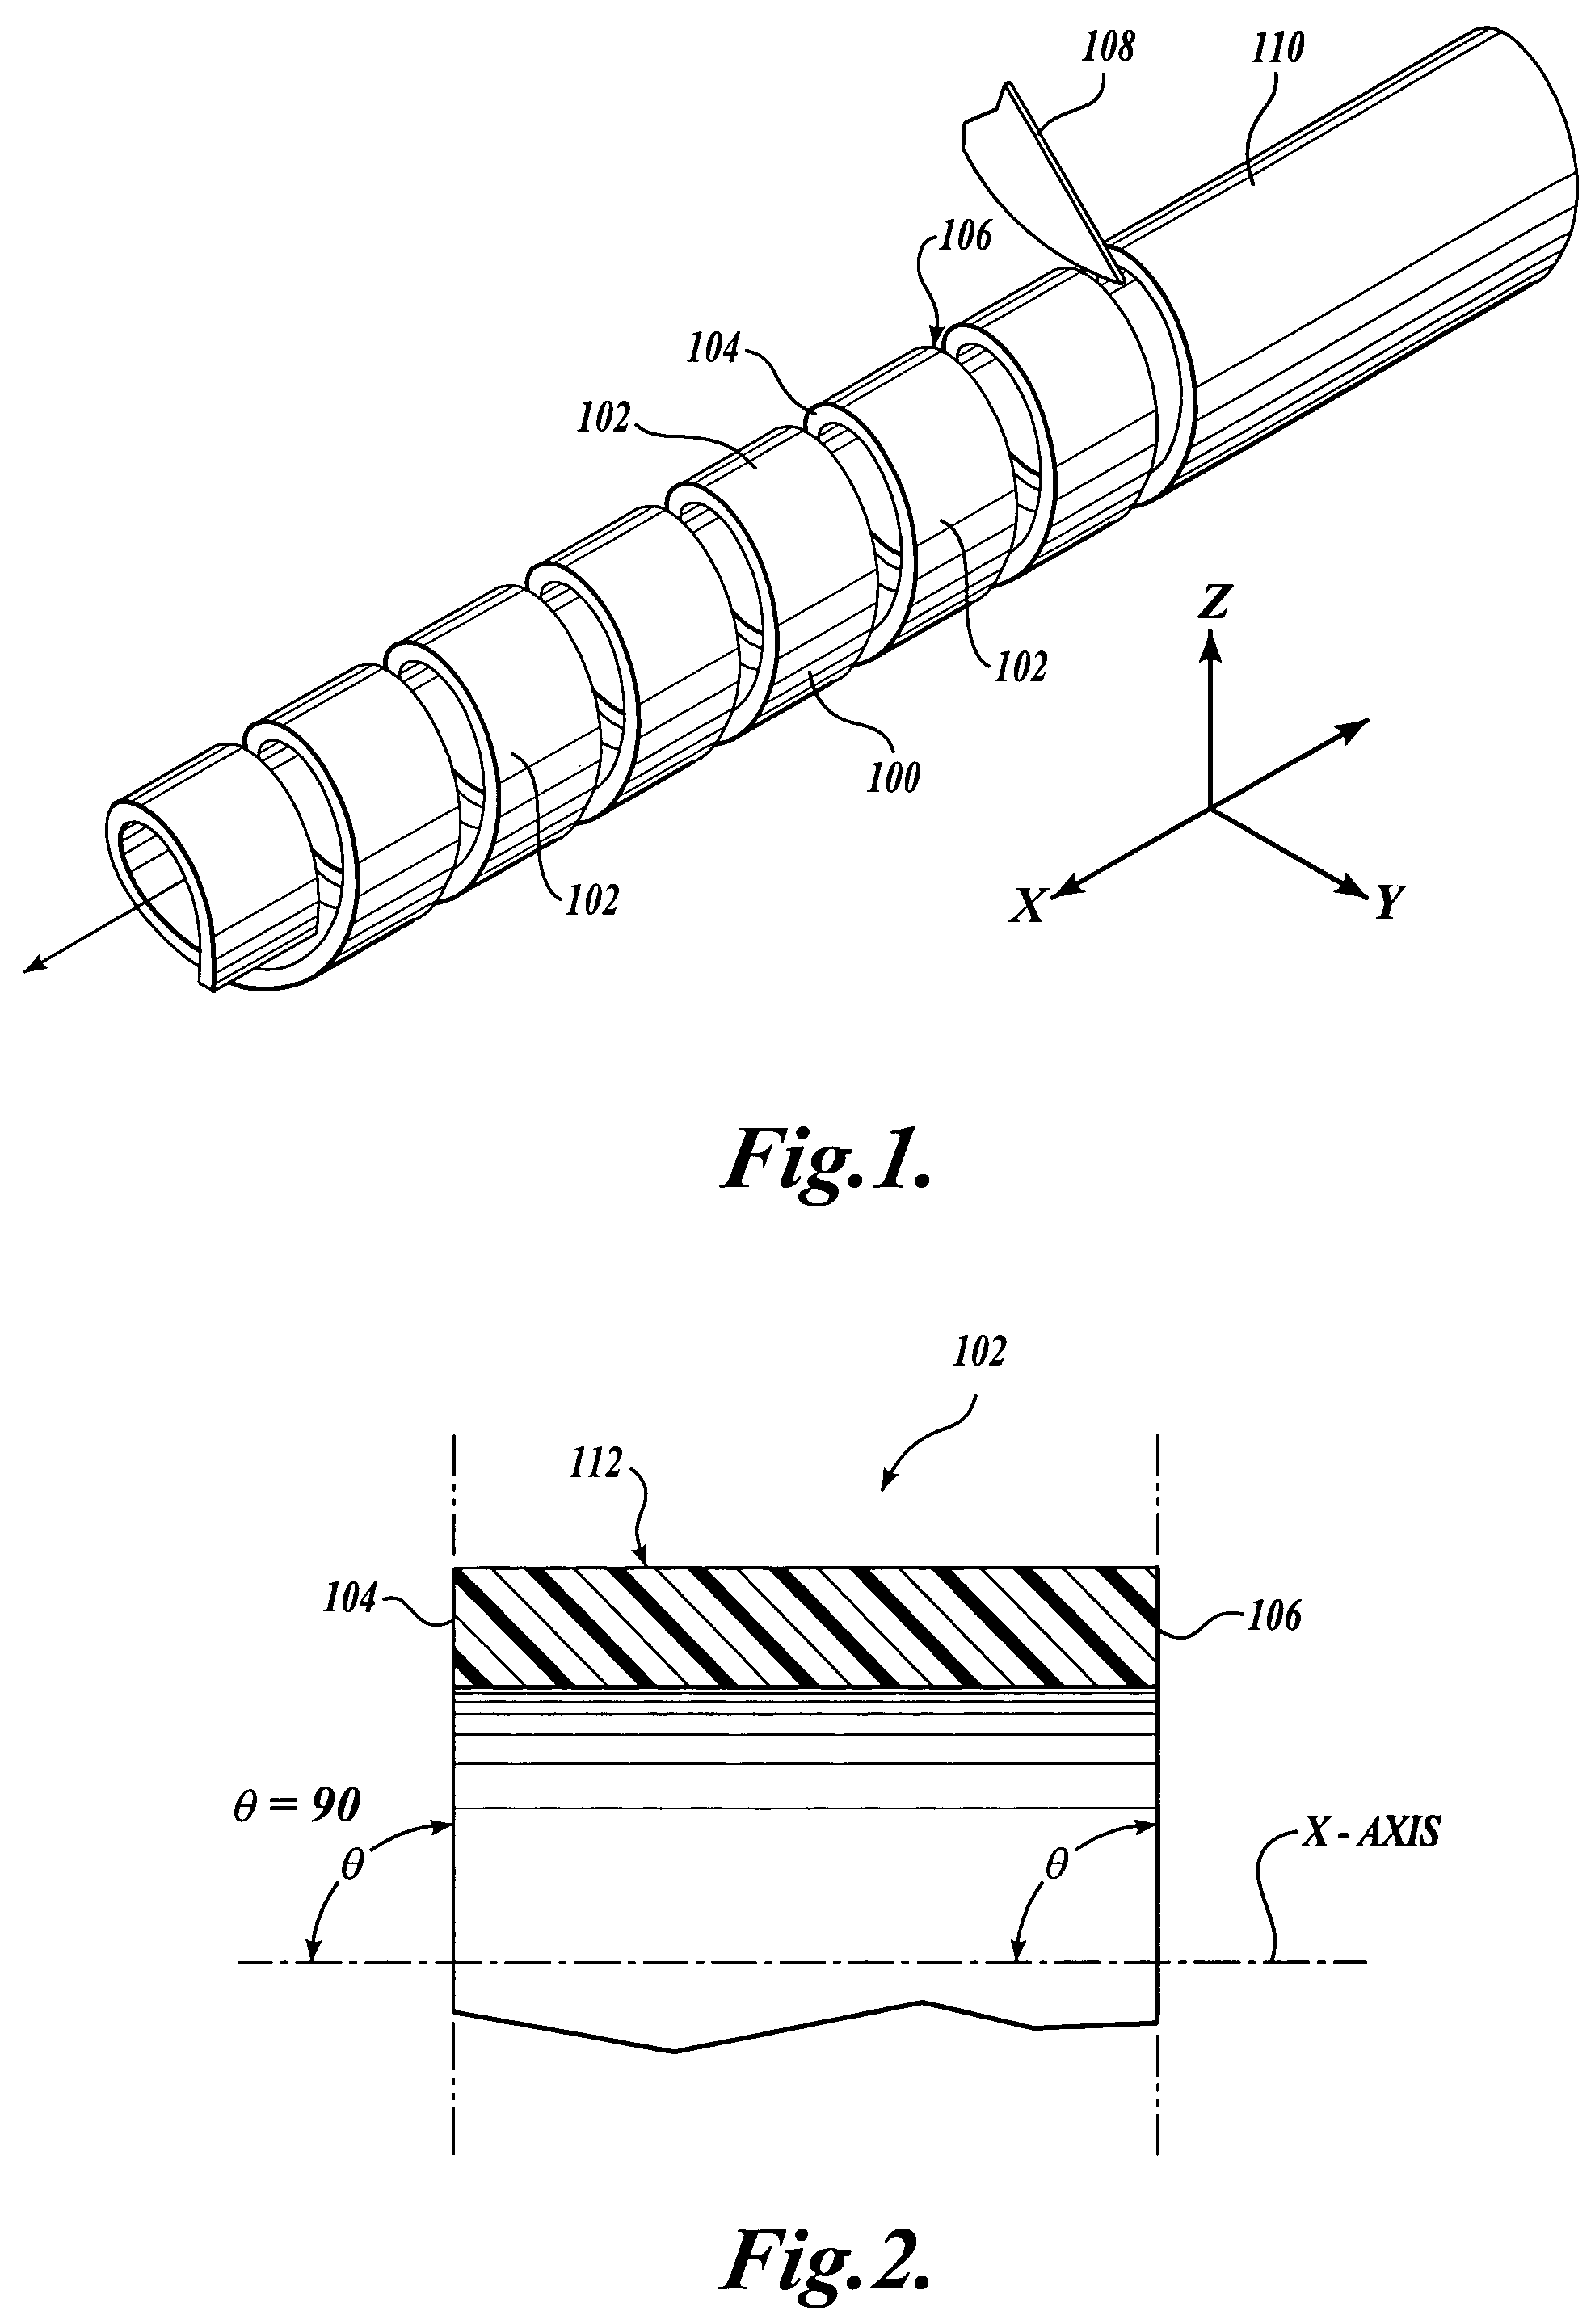 Flexible device shaft with angled spiral wrap